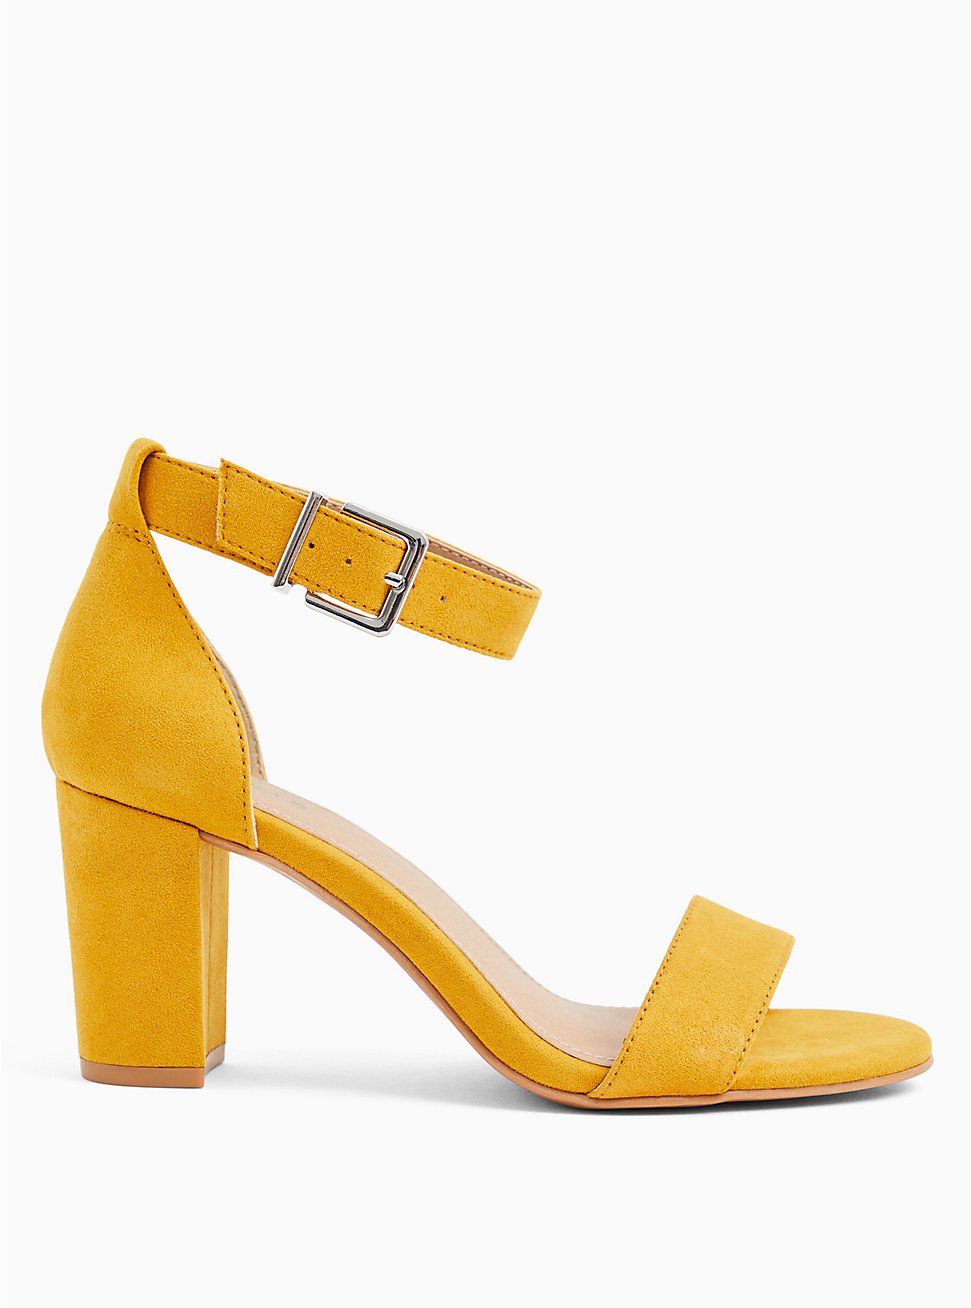 Plus Size Staci - Mustard Yellow Faux Suede Ankle Strap Tapered Heel (WW), YELLOW, hi-res